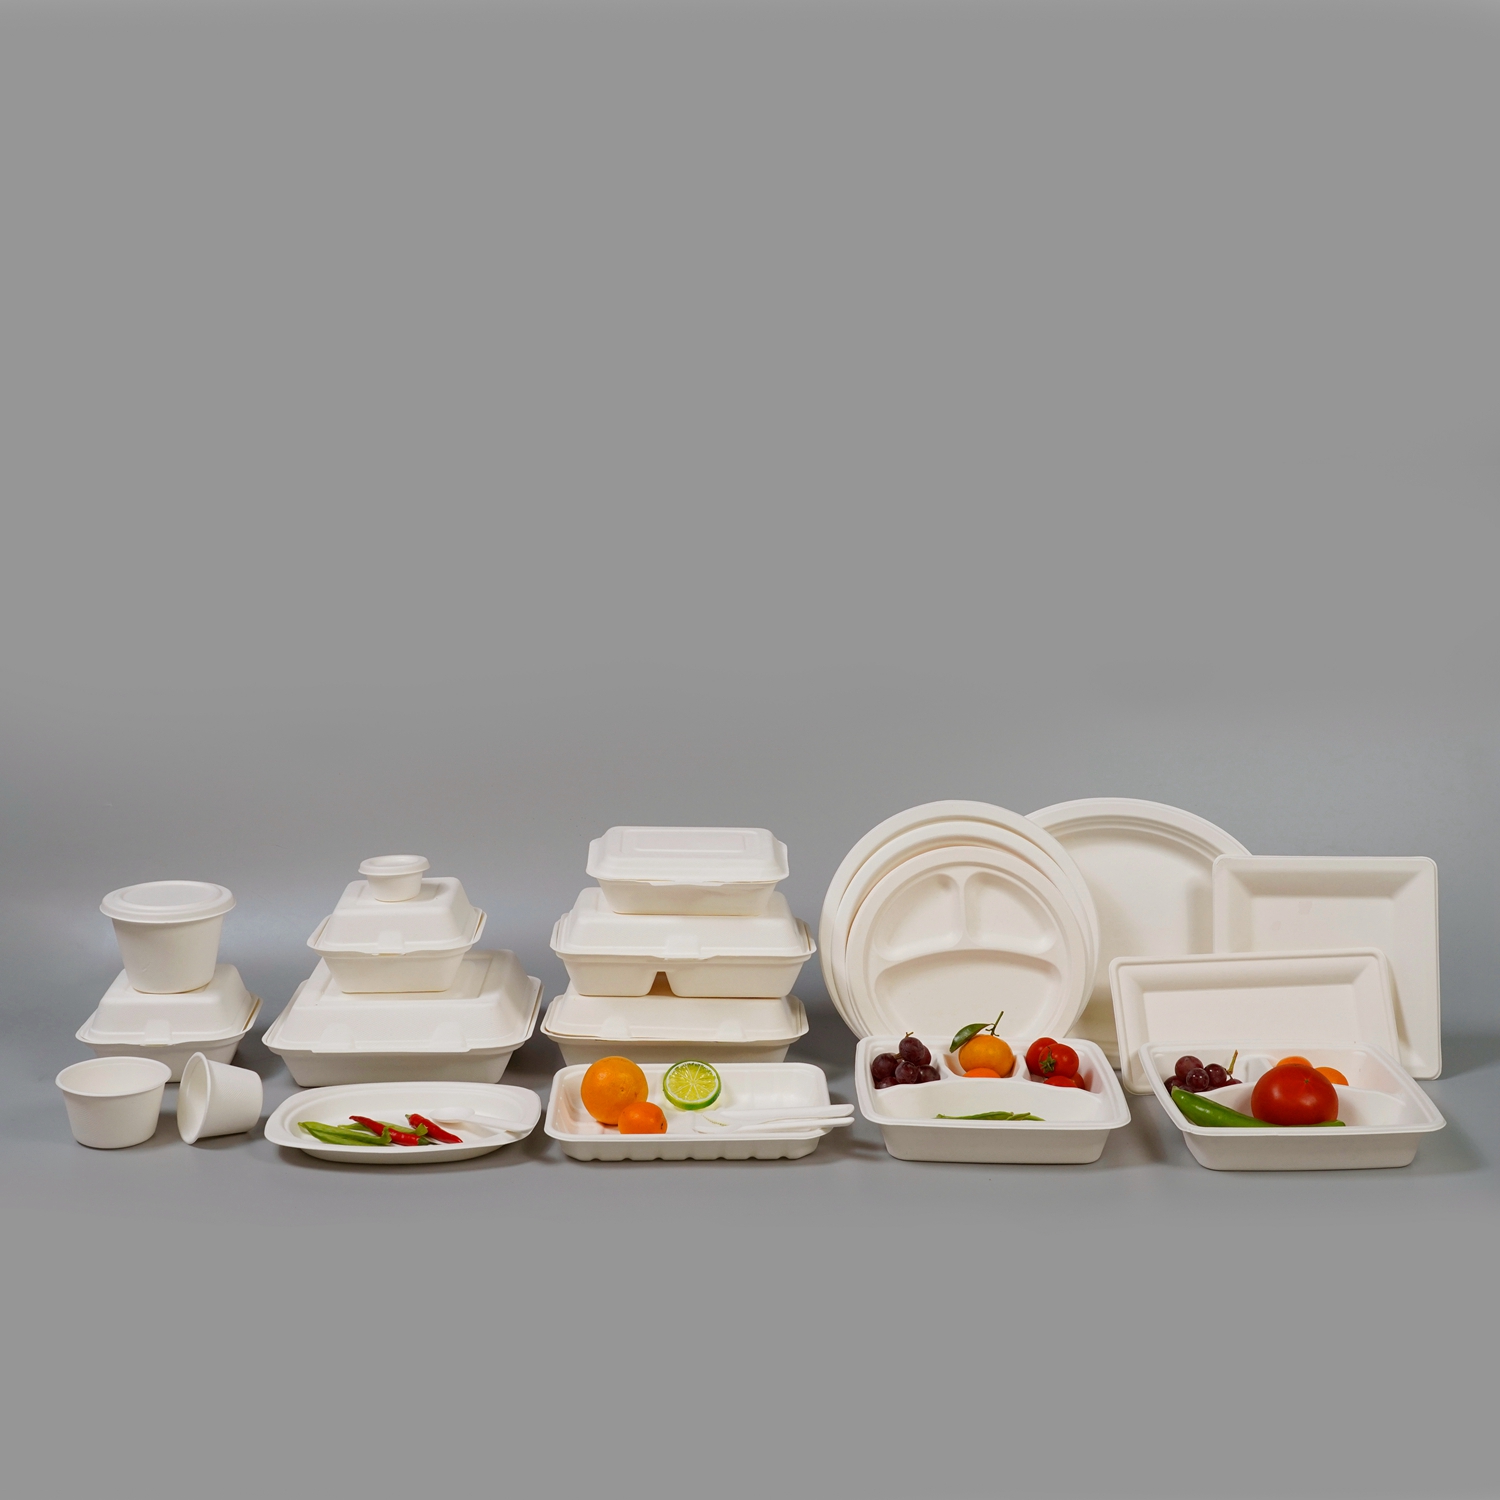 Do you want to know how MVIECPACK performed at the 133rd Canton Fair Global Share? Bagasse Food Container, Biodegradable Tableware, Biodegradable Food Container, biodegradable takeaway containers